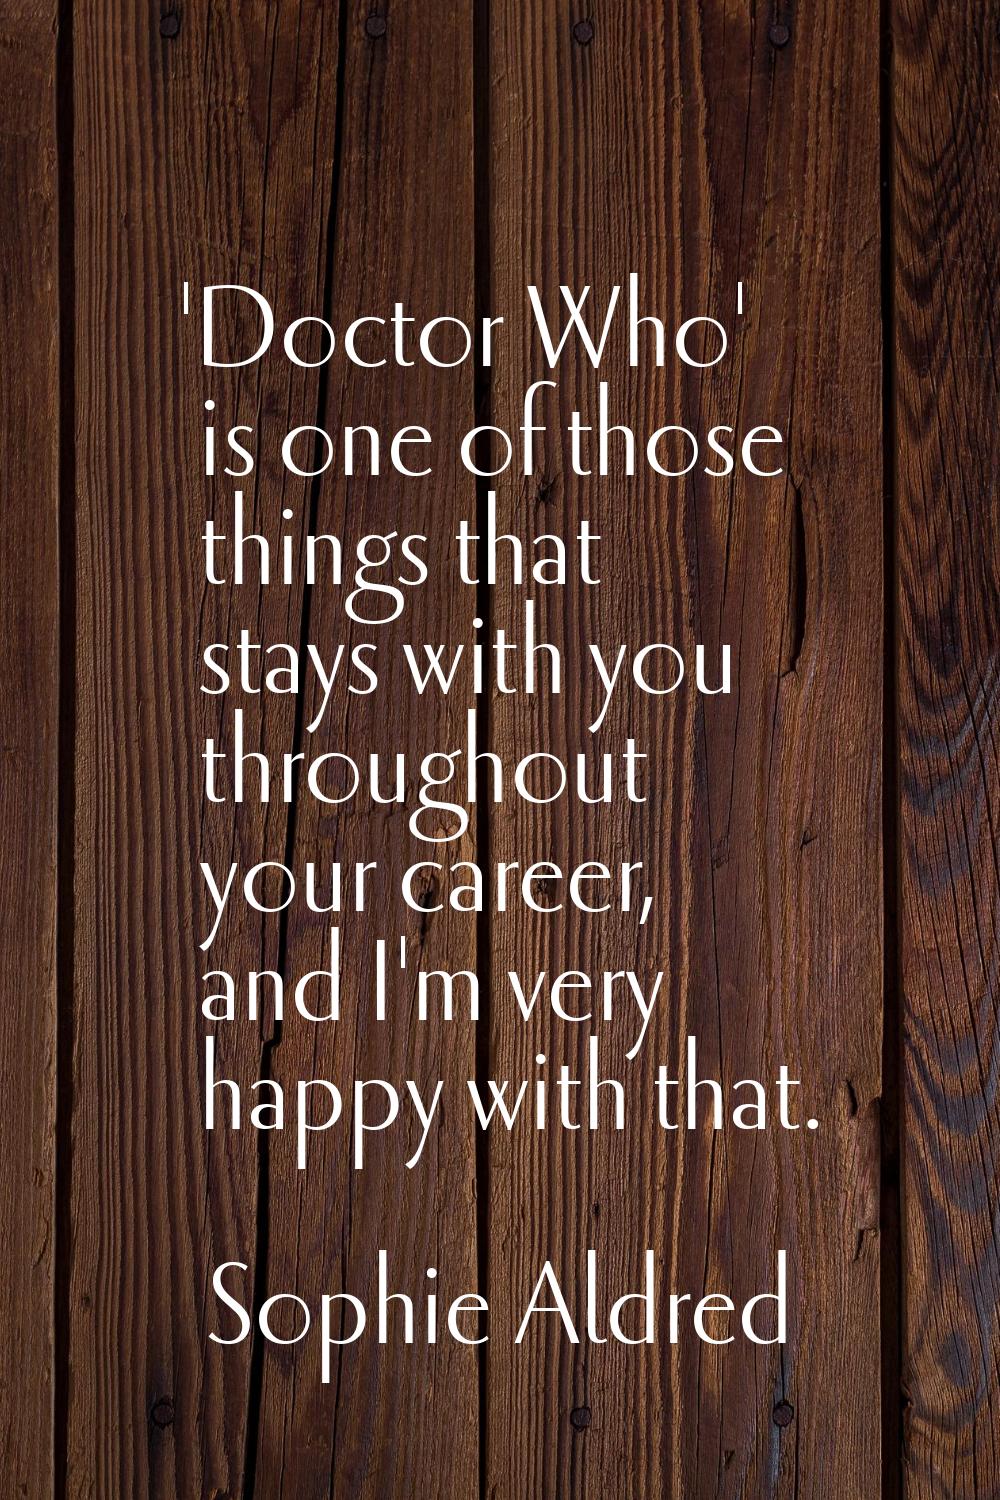 'Doctor Who' is one of those things that stays with you throughout your career, and I'm very happy 